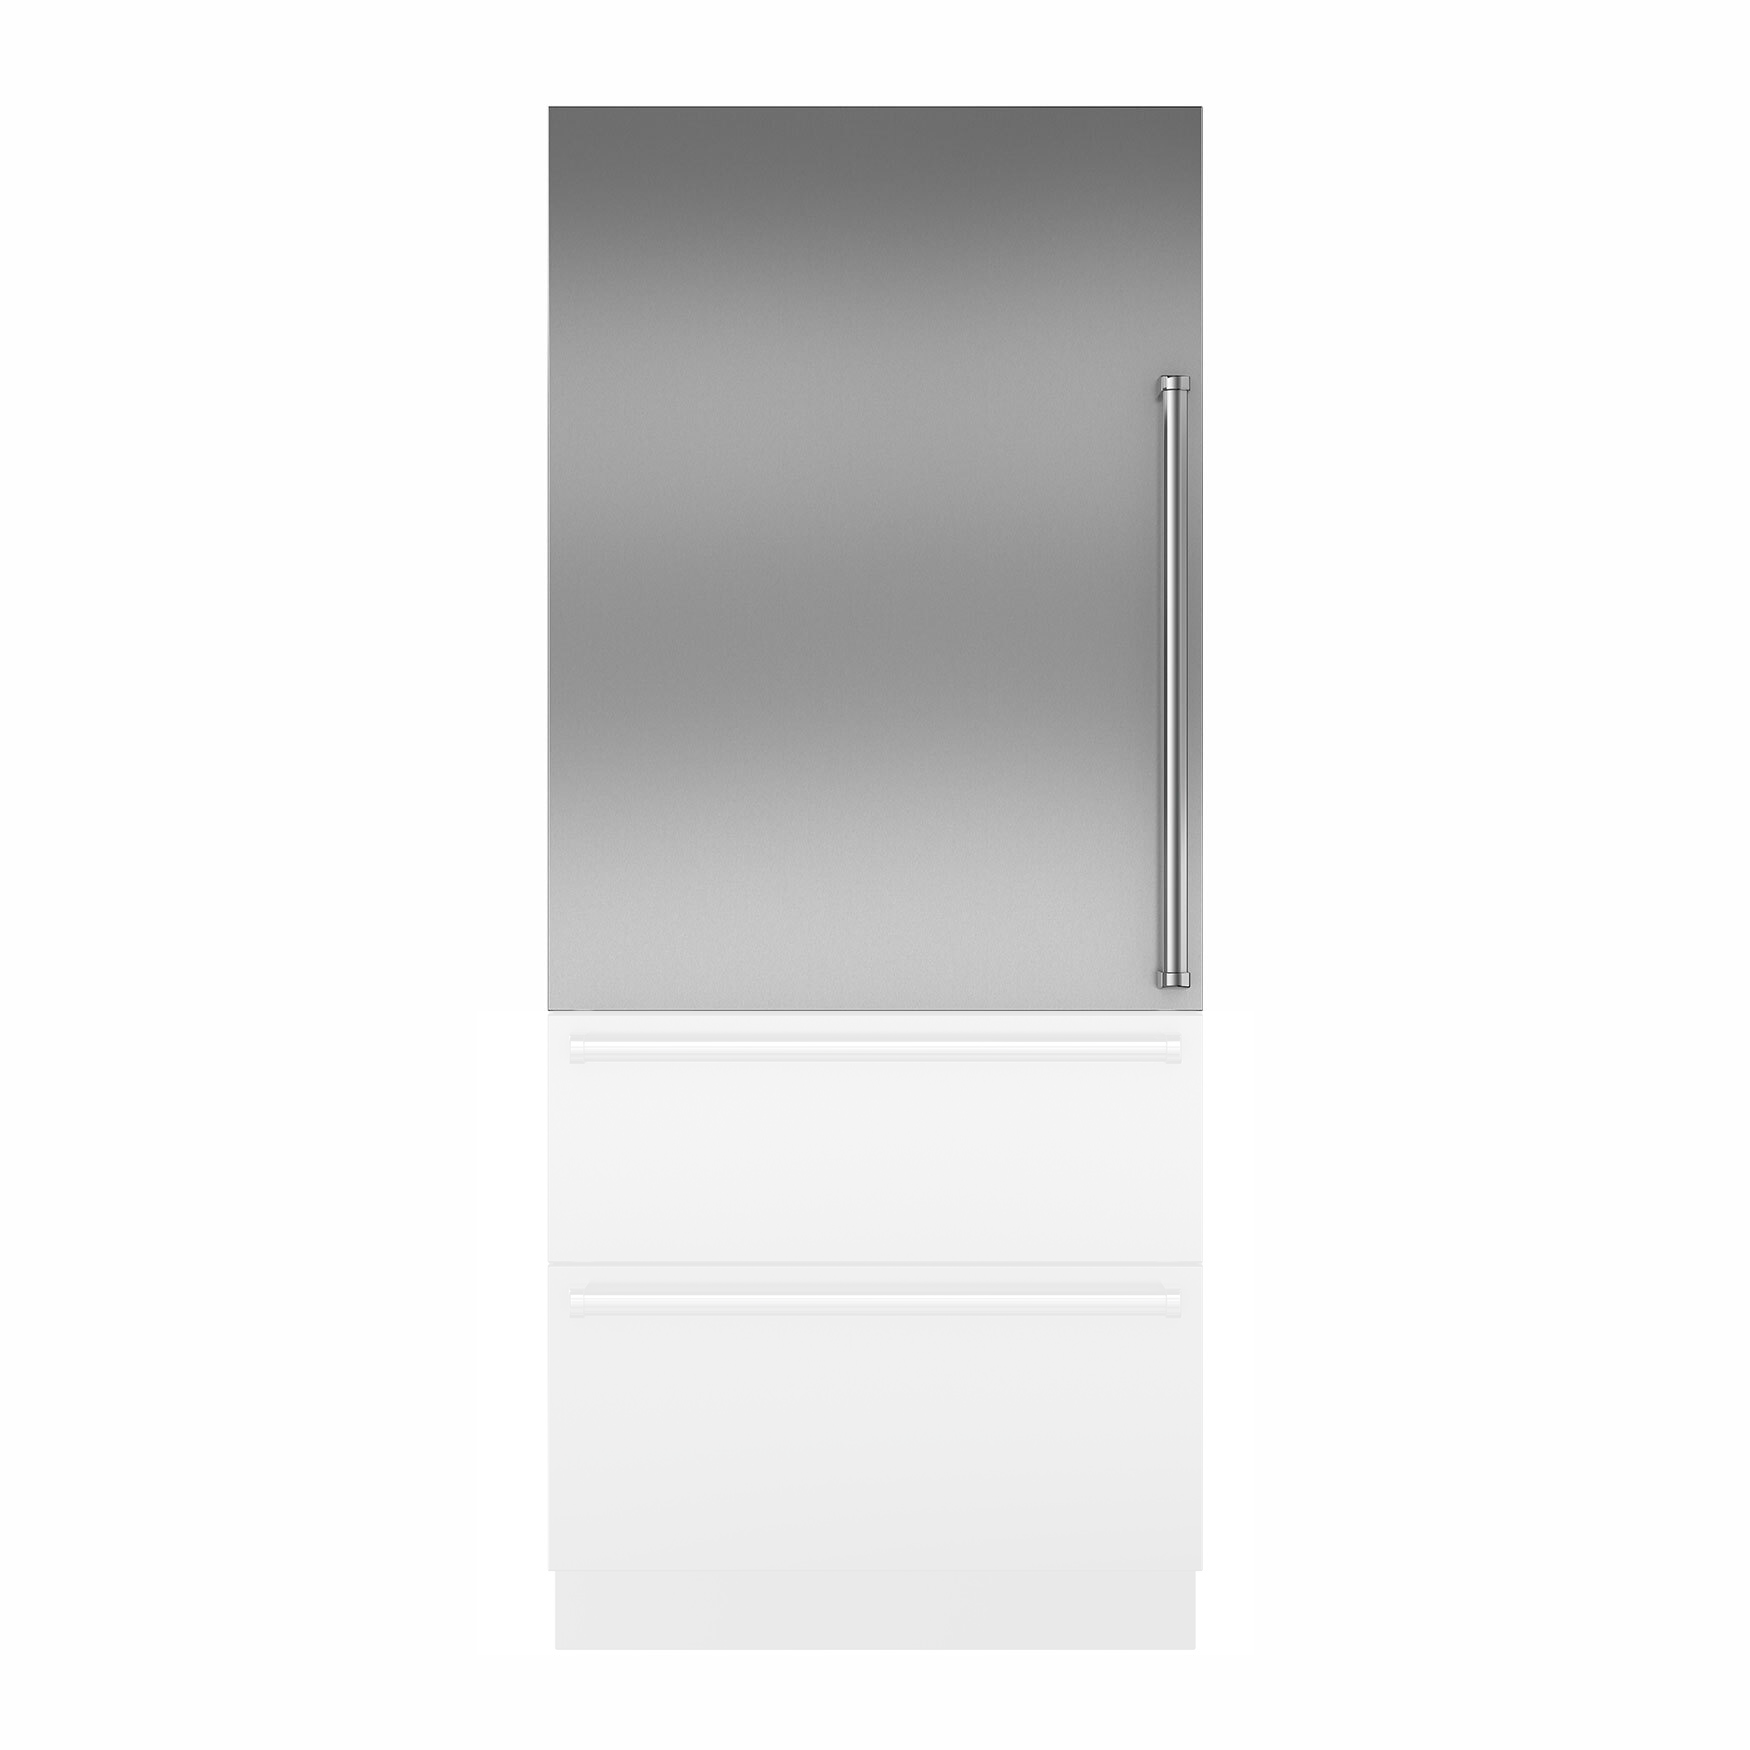 Sub-Zero Stainless Steel Frontal with Pro-Handle - For Combination Tall Refrigerator/Freezer - 914mm